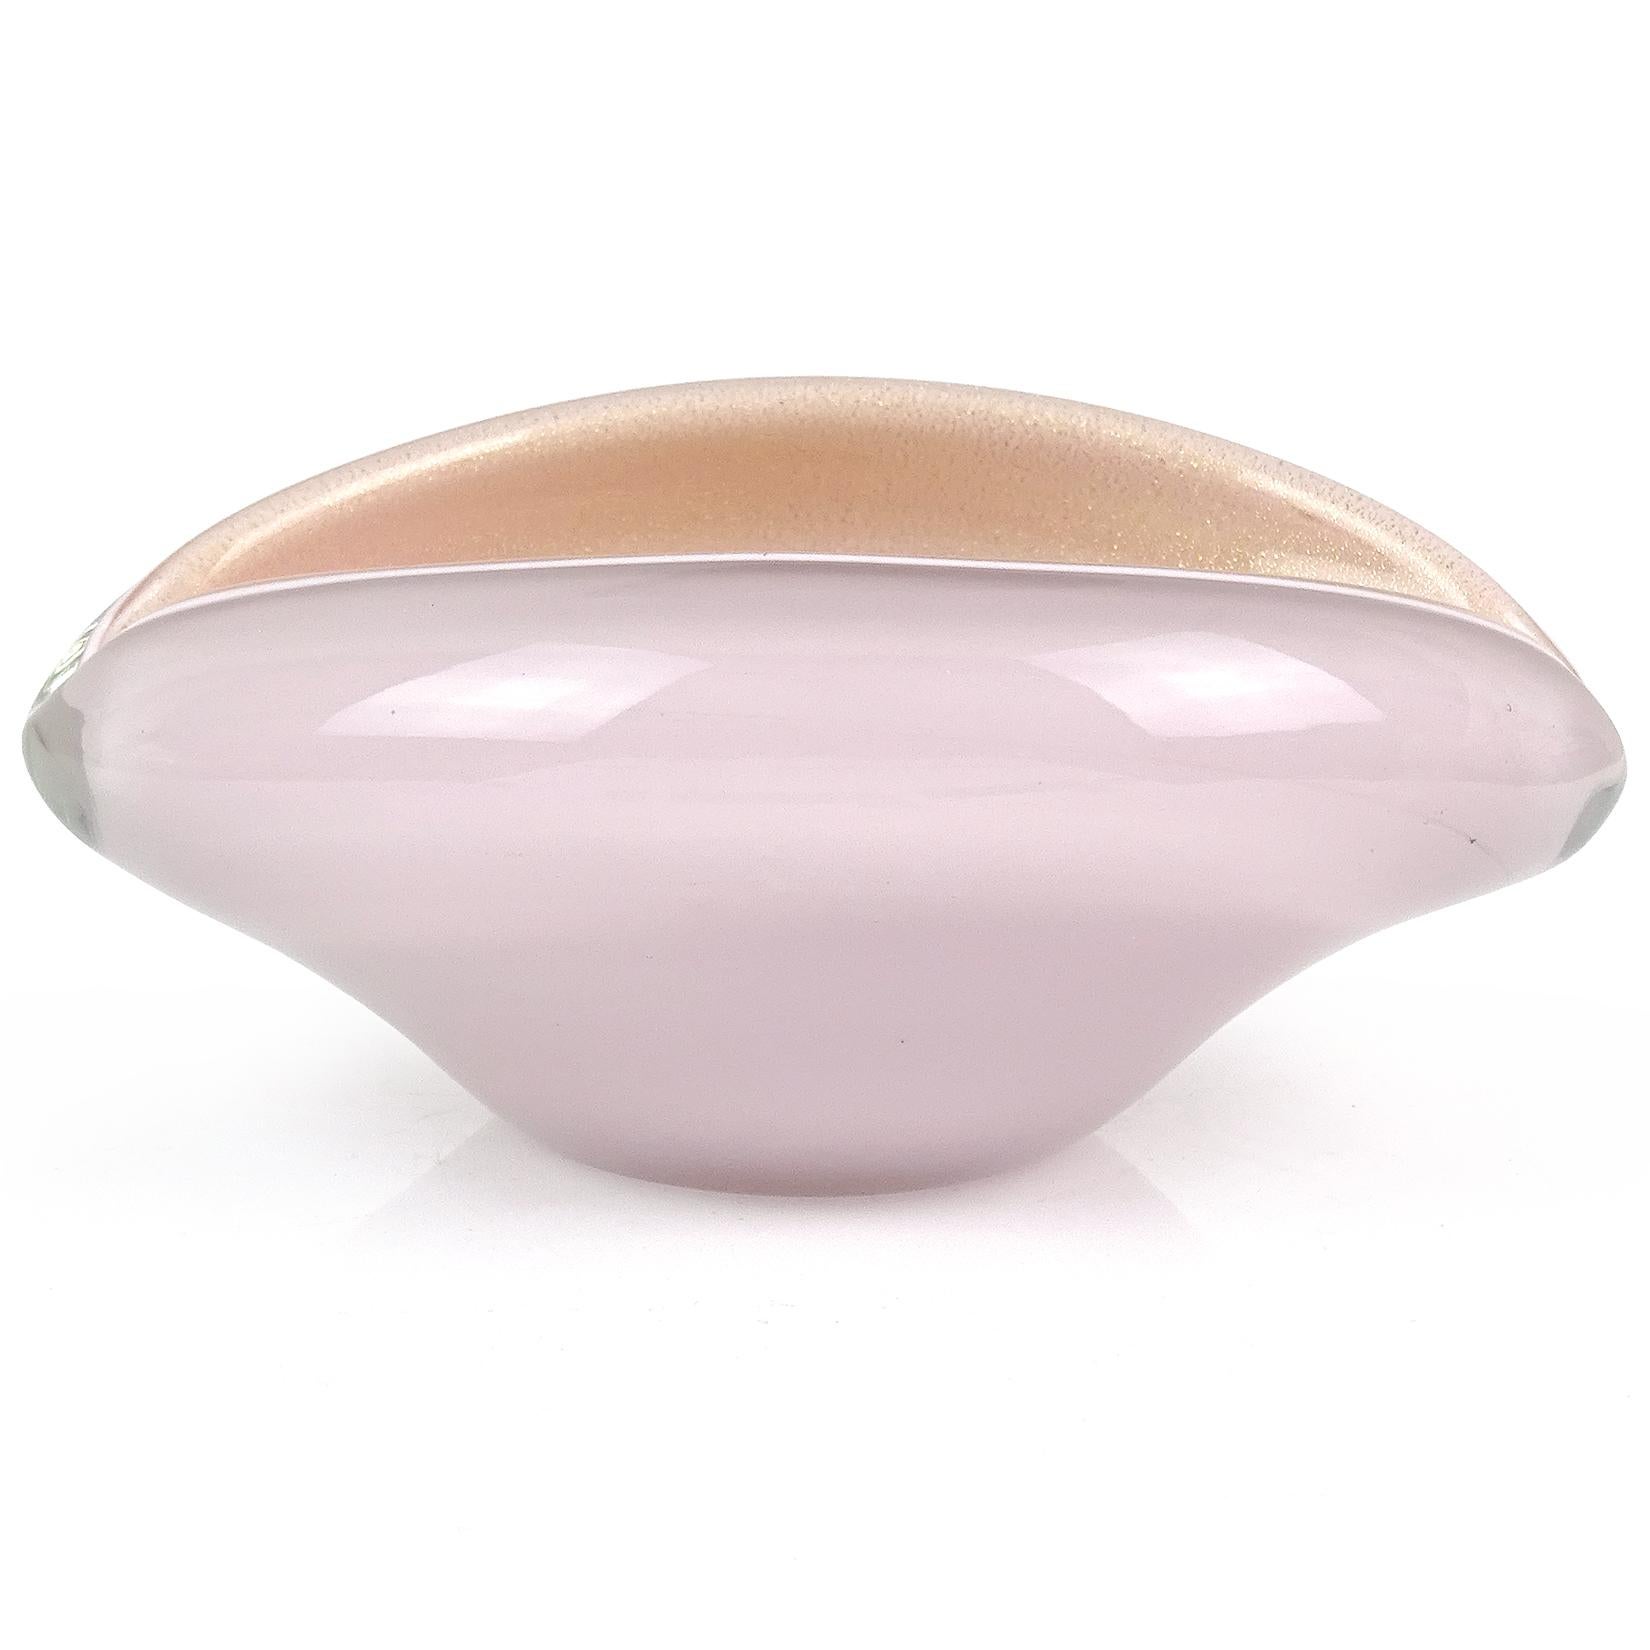 Only 1 left! Beautiful vintage Murano hand blown pink and gold flecks Italian art glass clam shaped bowl. Attributed to designer Alfredo Barbini. Profusely covered in gold leaf inside the bowl. Would make a great jewelry dish for any vanity,